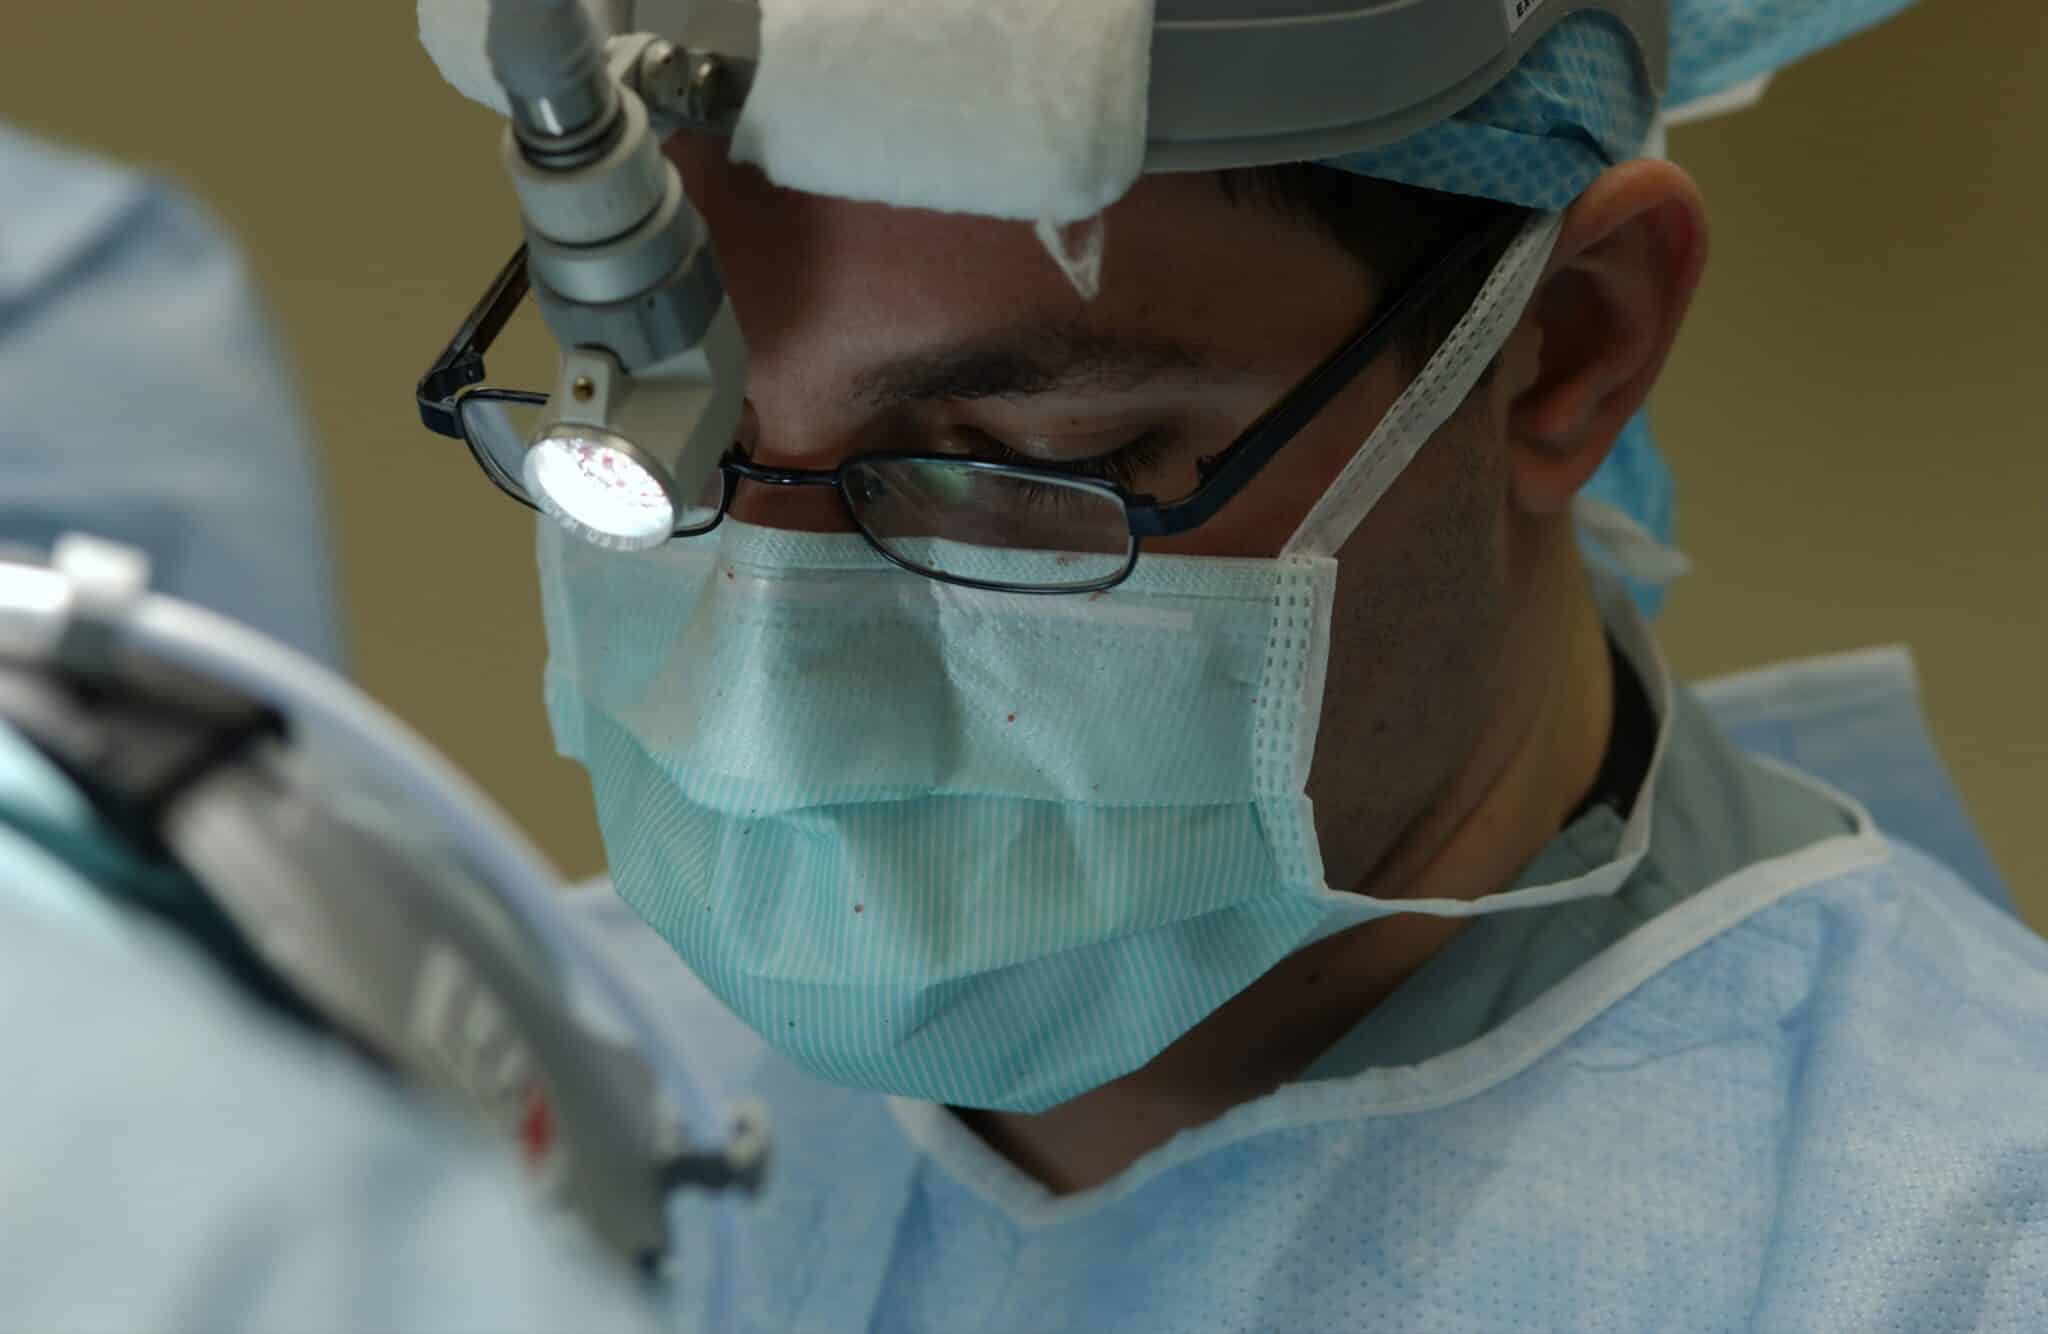 Surgeon wearing a mask during surgery.